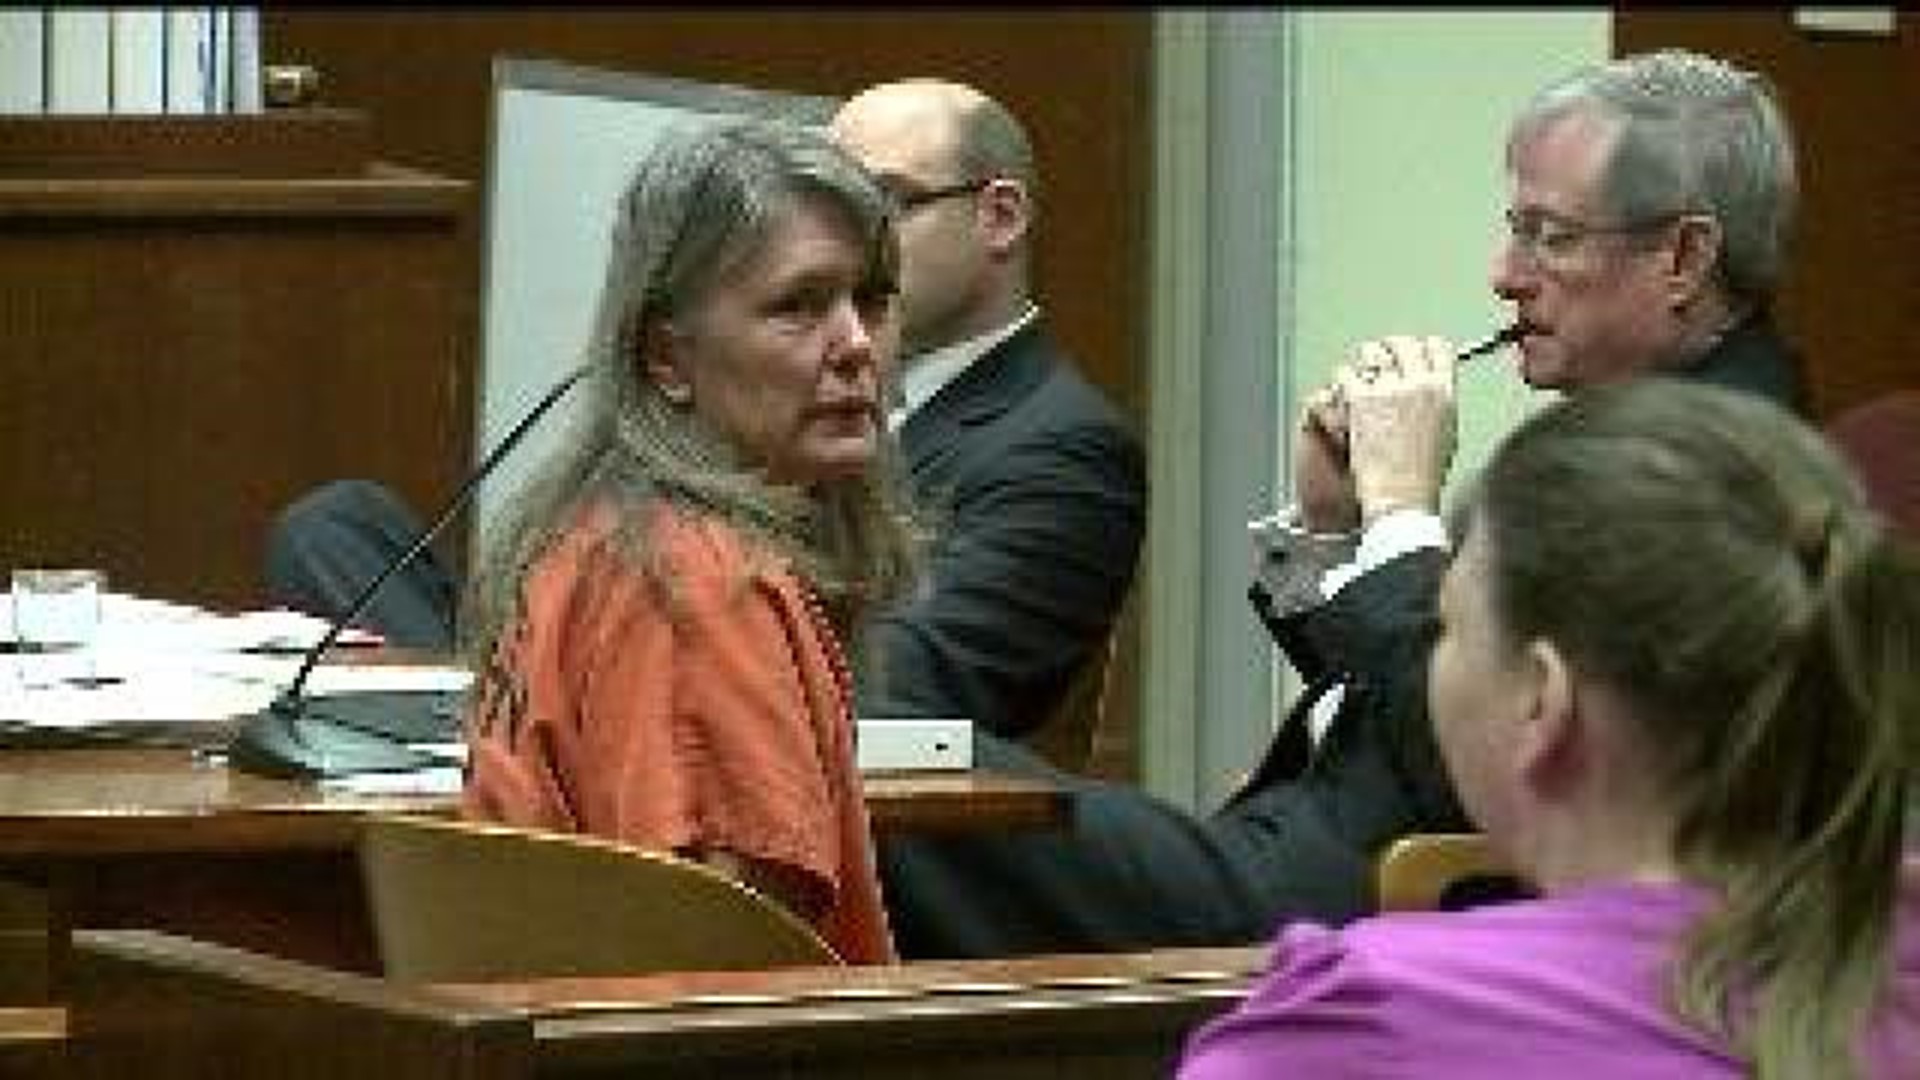 Woman with life sentence now has chance of parole